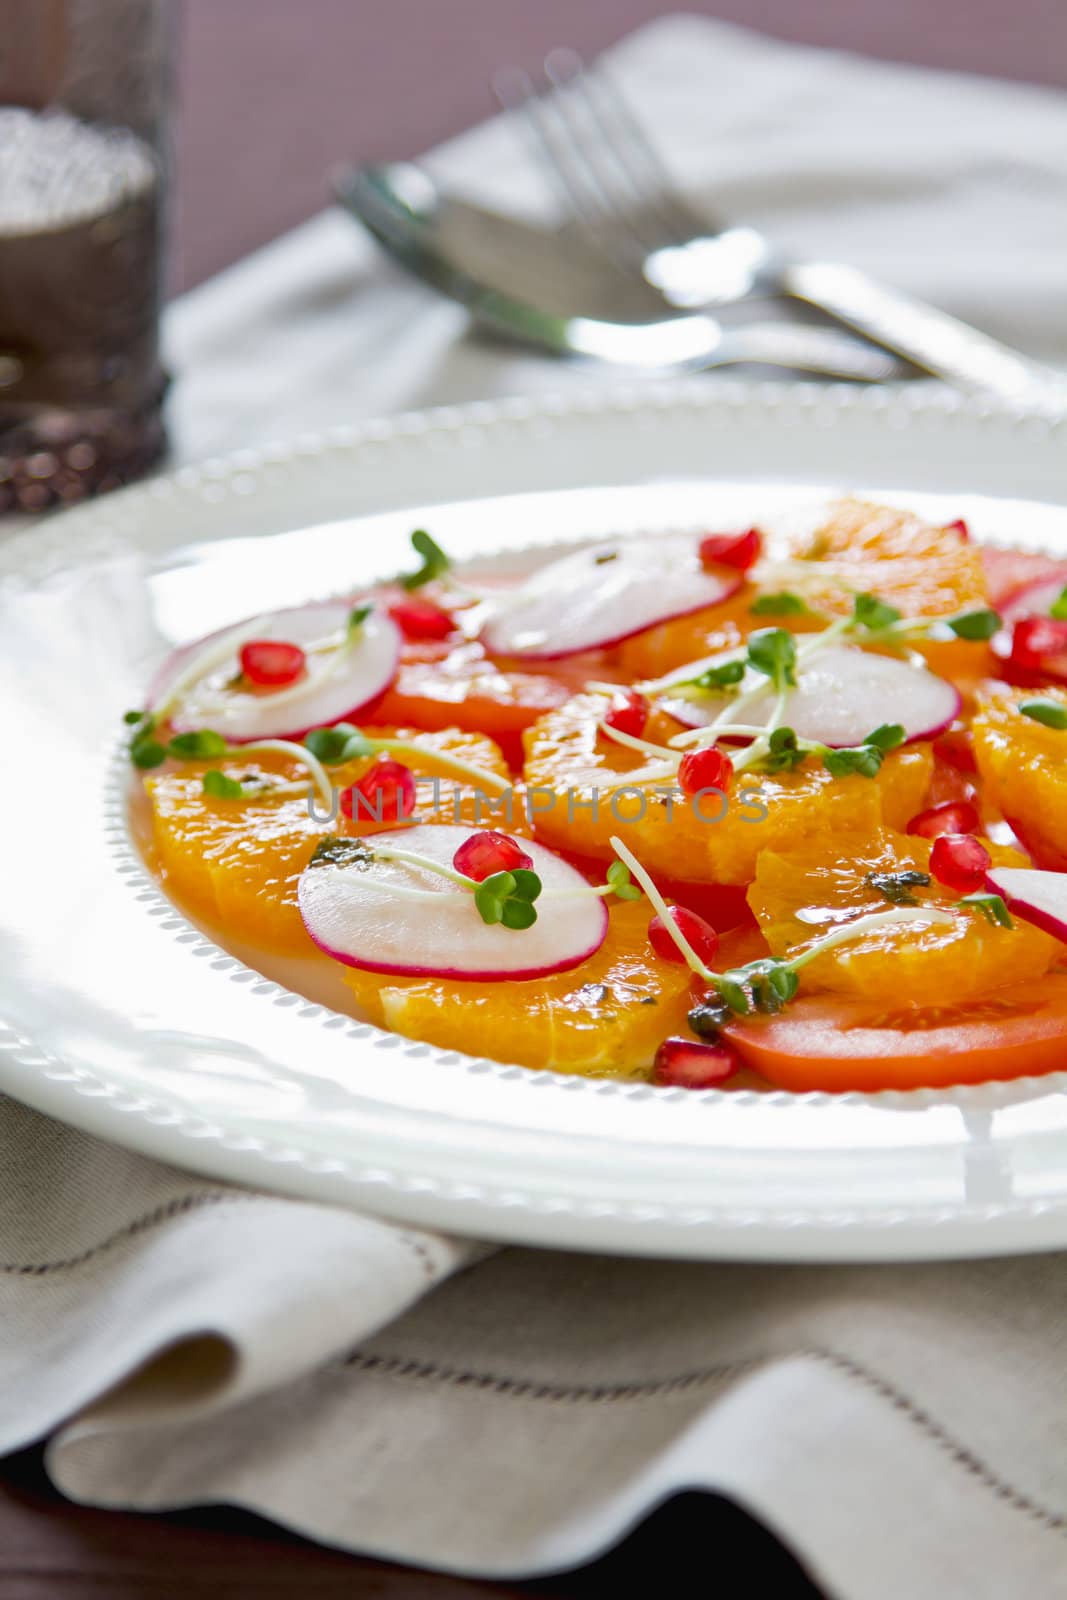 Orange with tomato and pomegranate salad by vanillaechoes